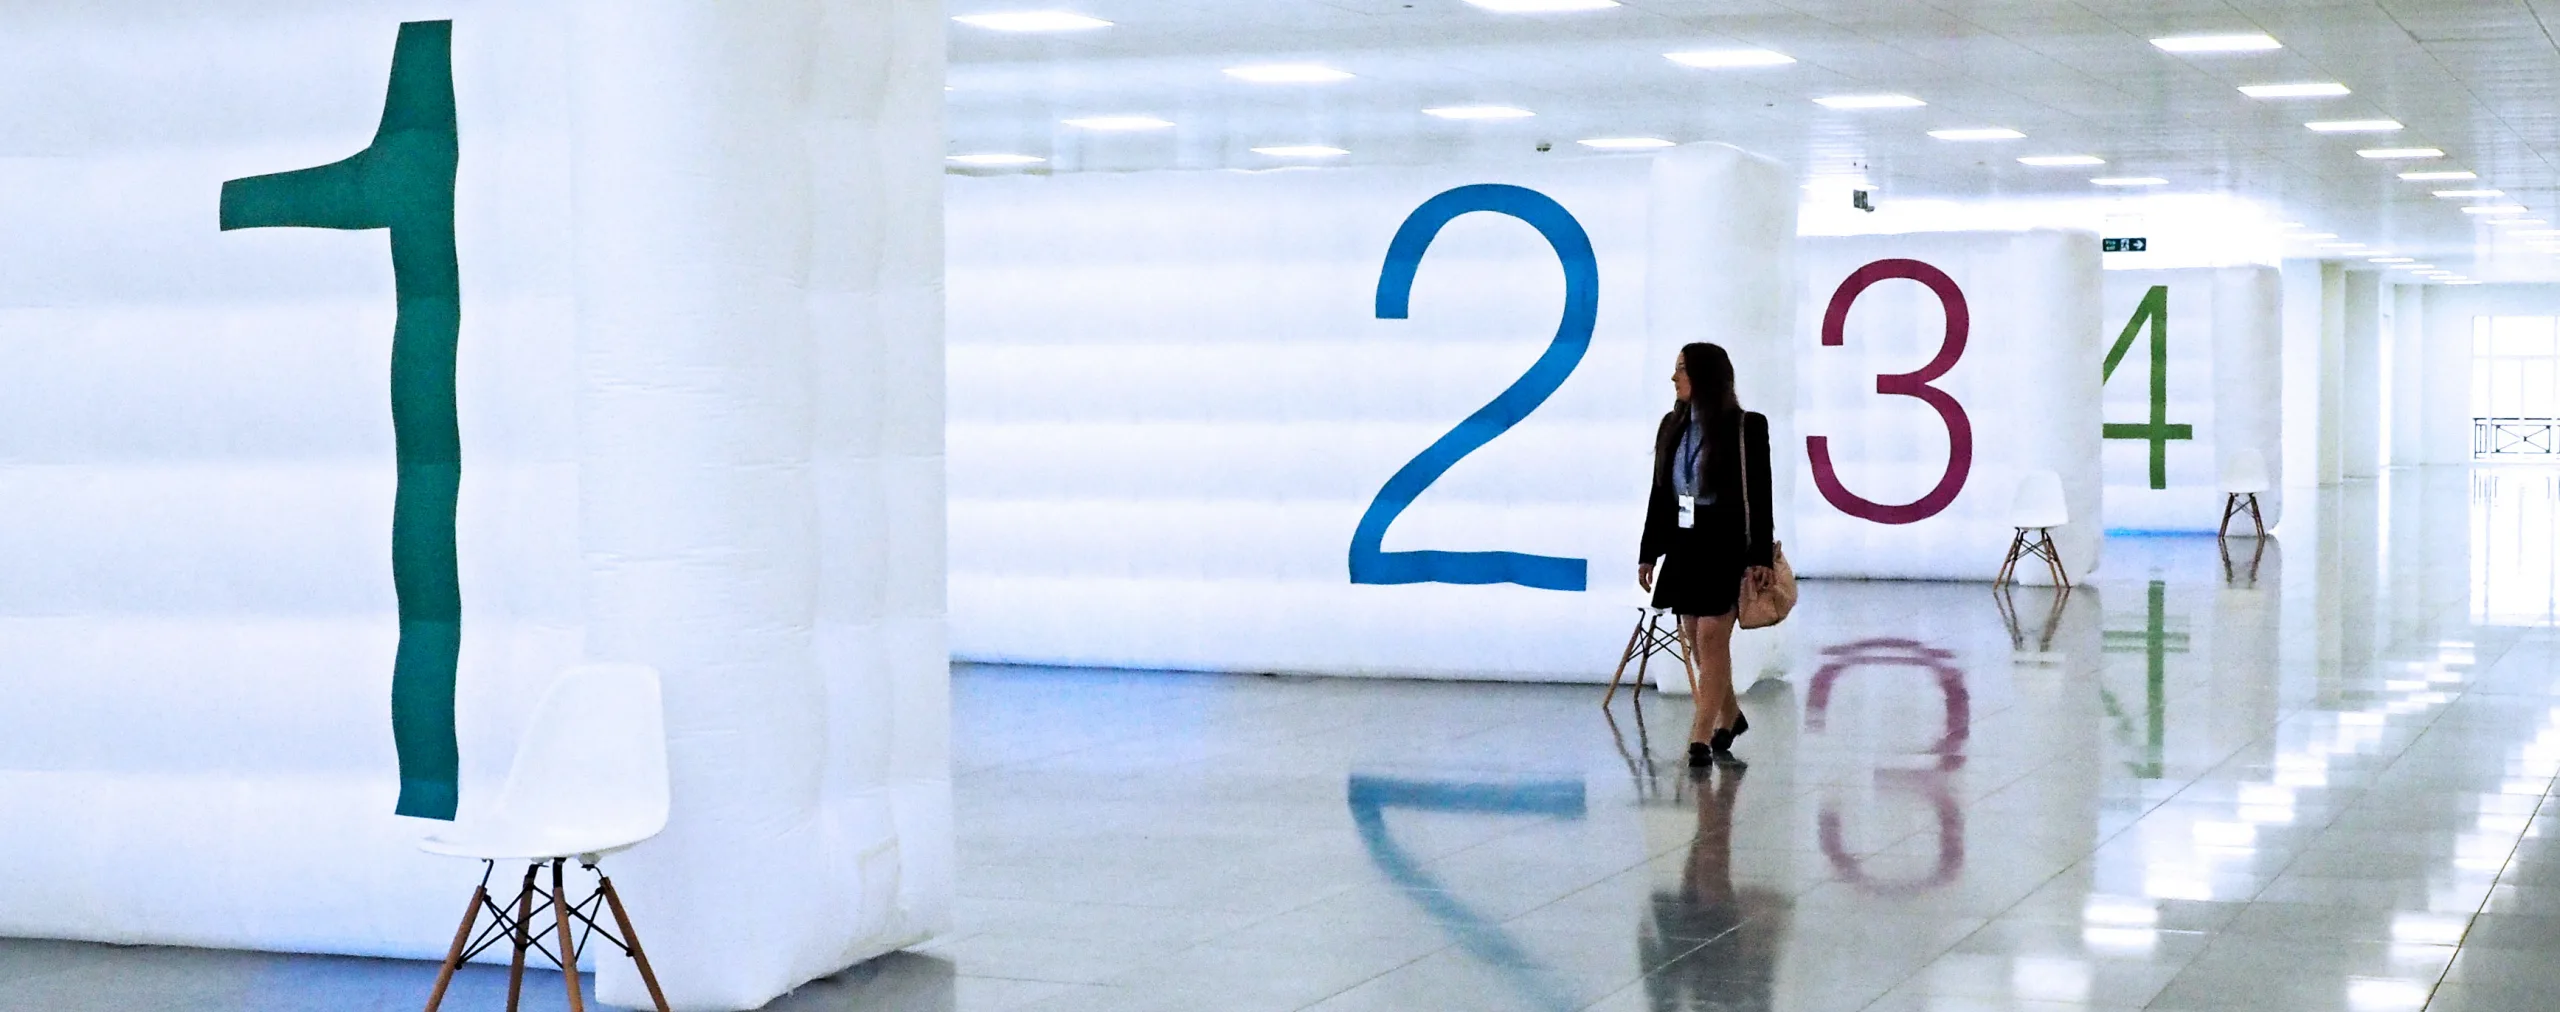 Pic showing several Created By Air inflatable walls used to divide a space. The walls have the numbers 1, 2, 3, 4. A woman is walking by